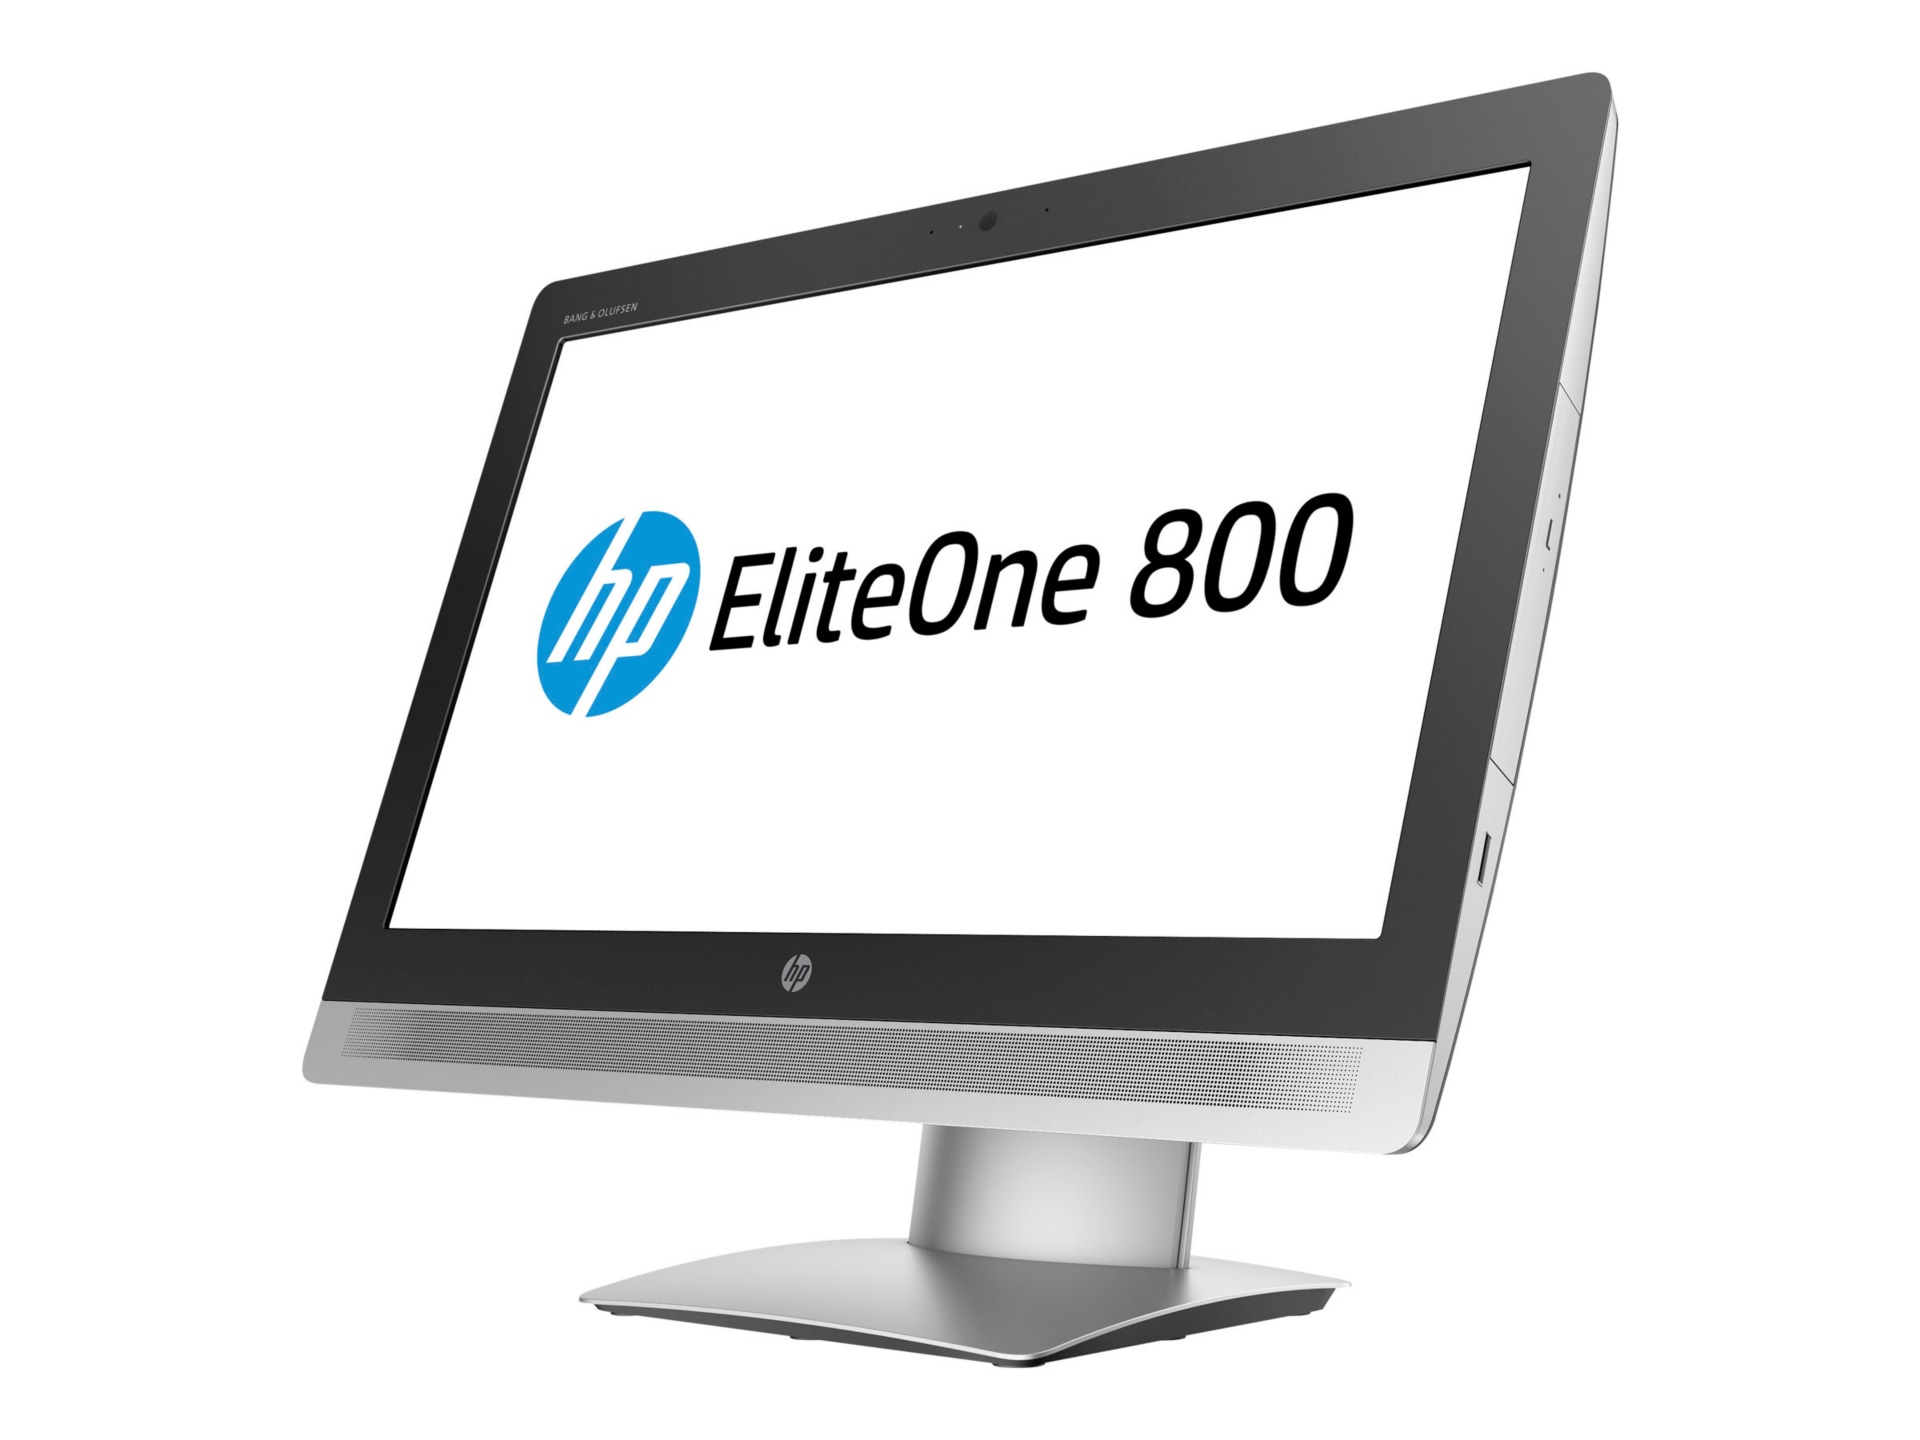 HP EliteOne 800 G2 - all-in-one - Core i7 6700 3.4 GHz - 8 GB - 128 GB - LED 23" - US